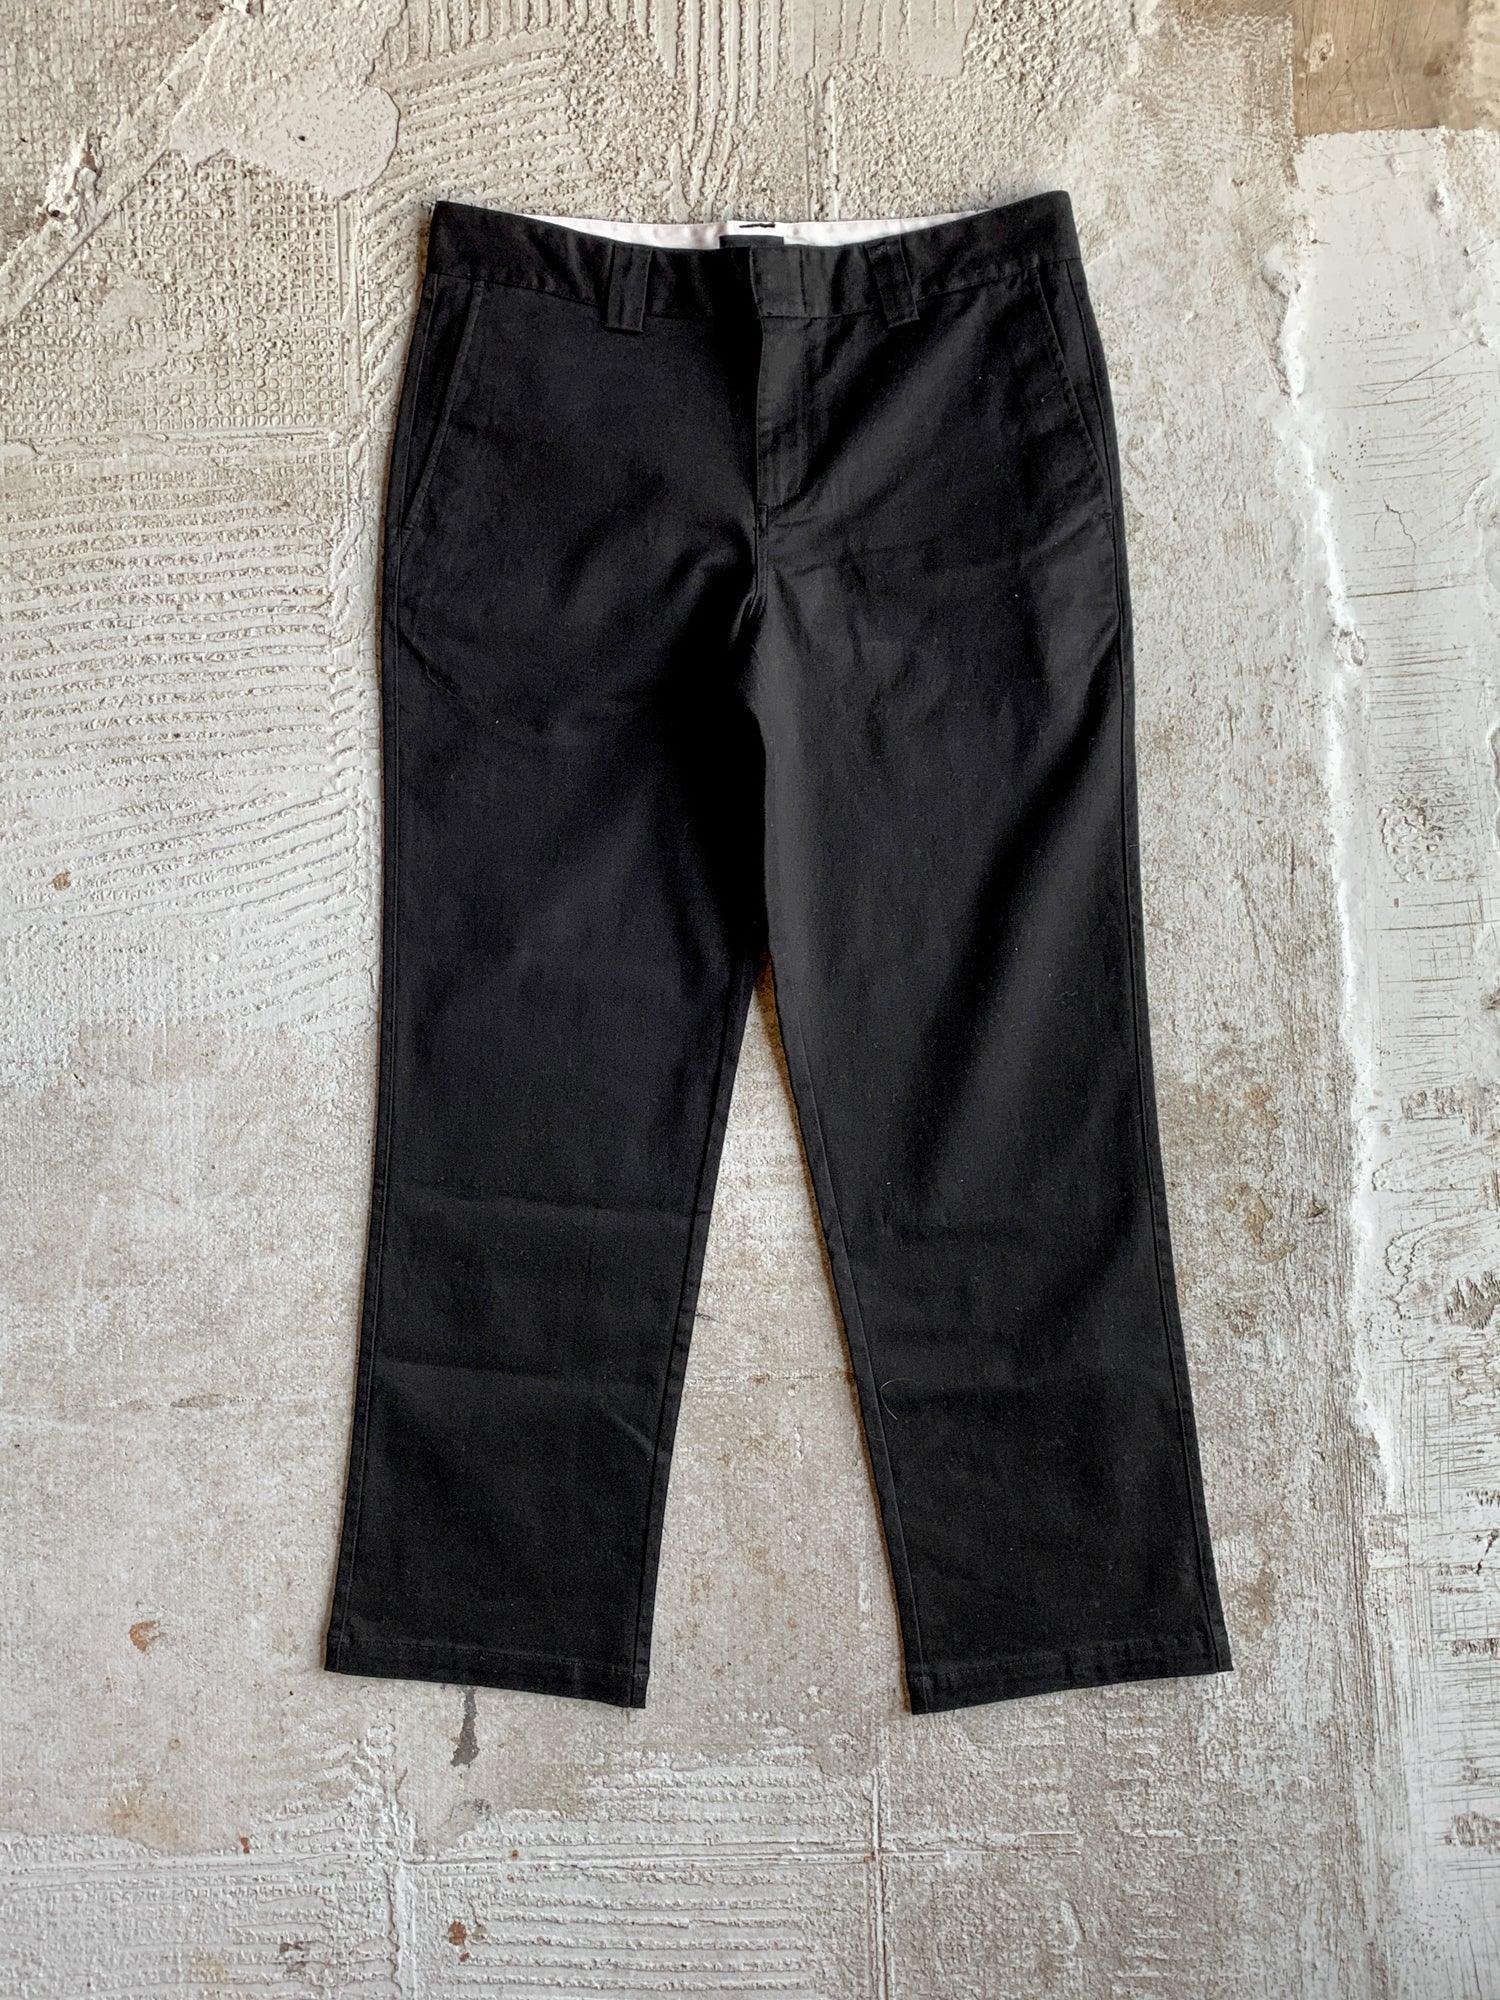 Watershed Brand Standard Issue Trousers - Black